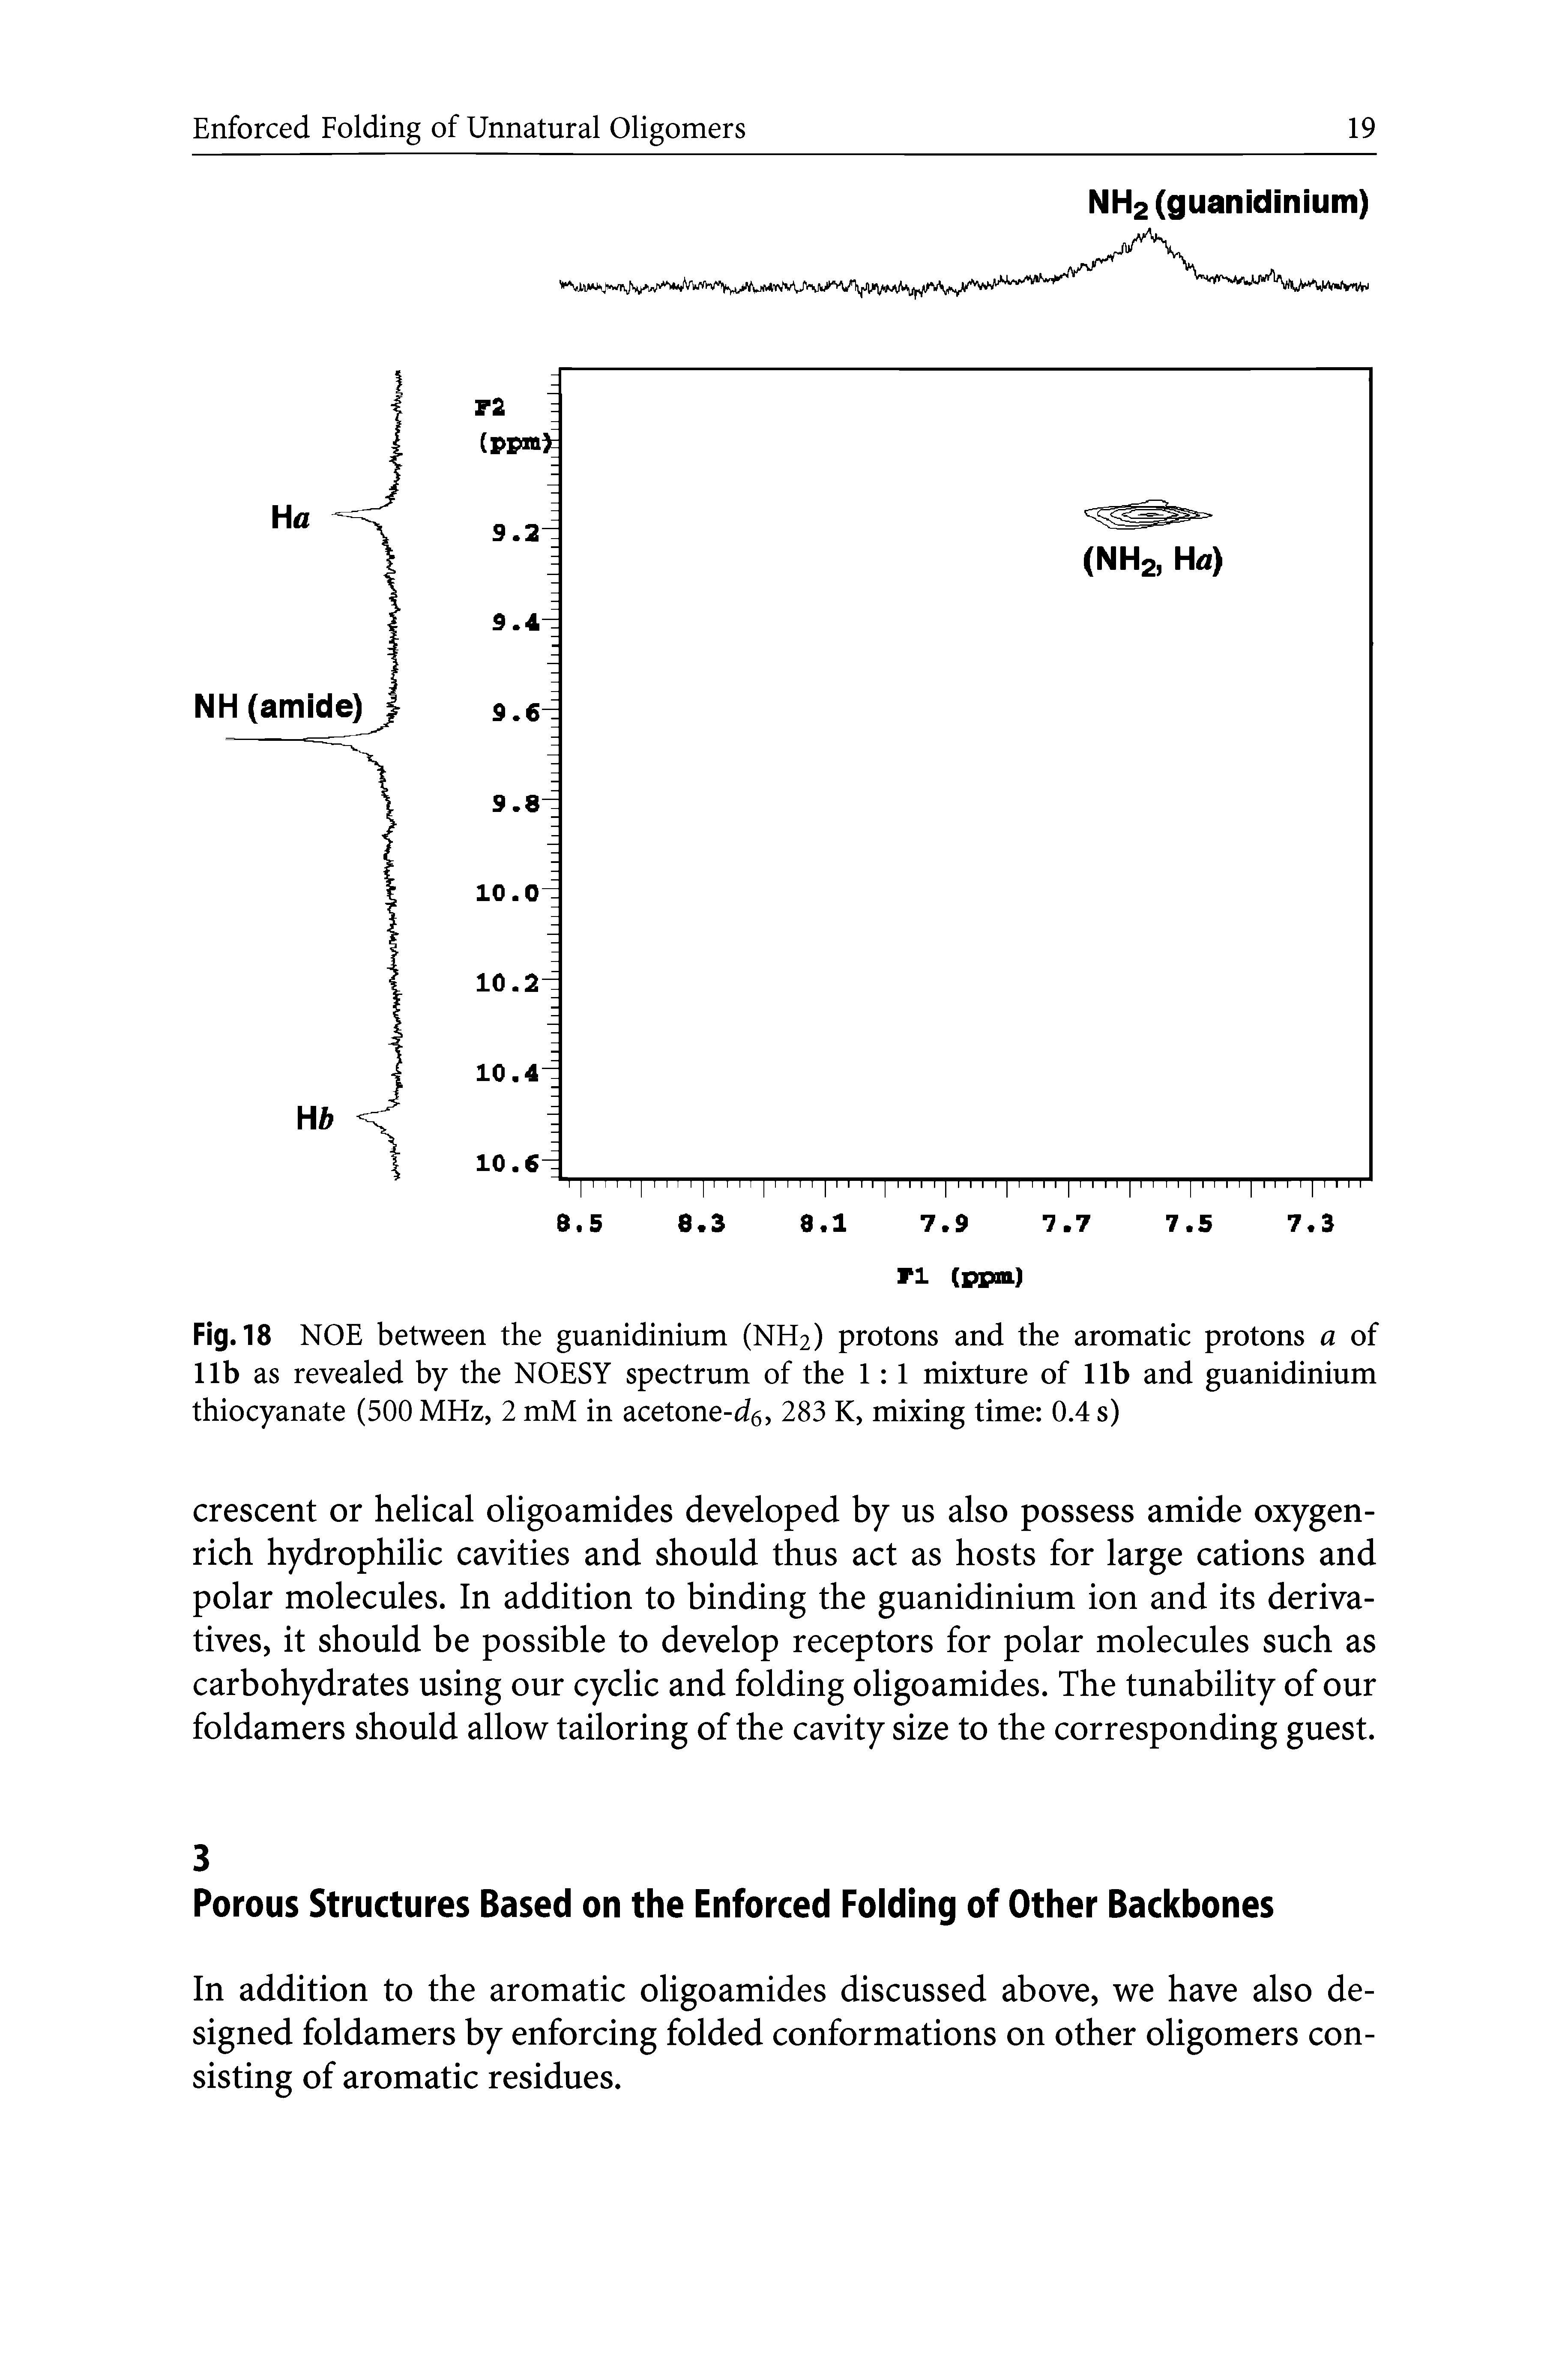 Fig. 18 NOE between the guanidinium (NH2) protons and the aromatic protons a of lib as revealed by the NOESY spectrum of the 1 1 mixture of lib and guanidinium thiocyanate (500 MHz, 2 mM in acetone-, 283 K, mixing time 0.4 s)...